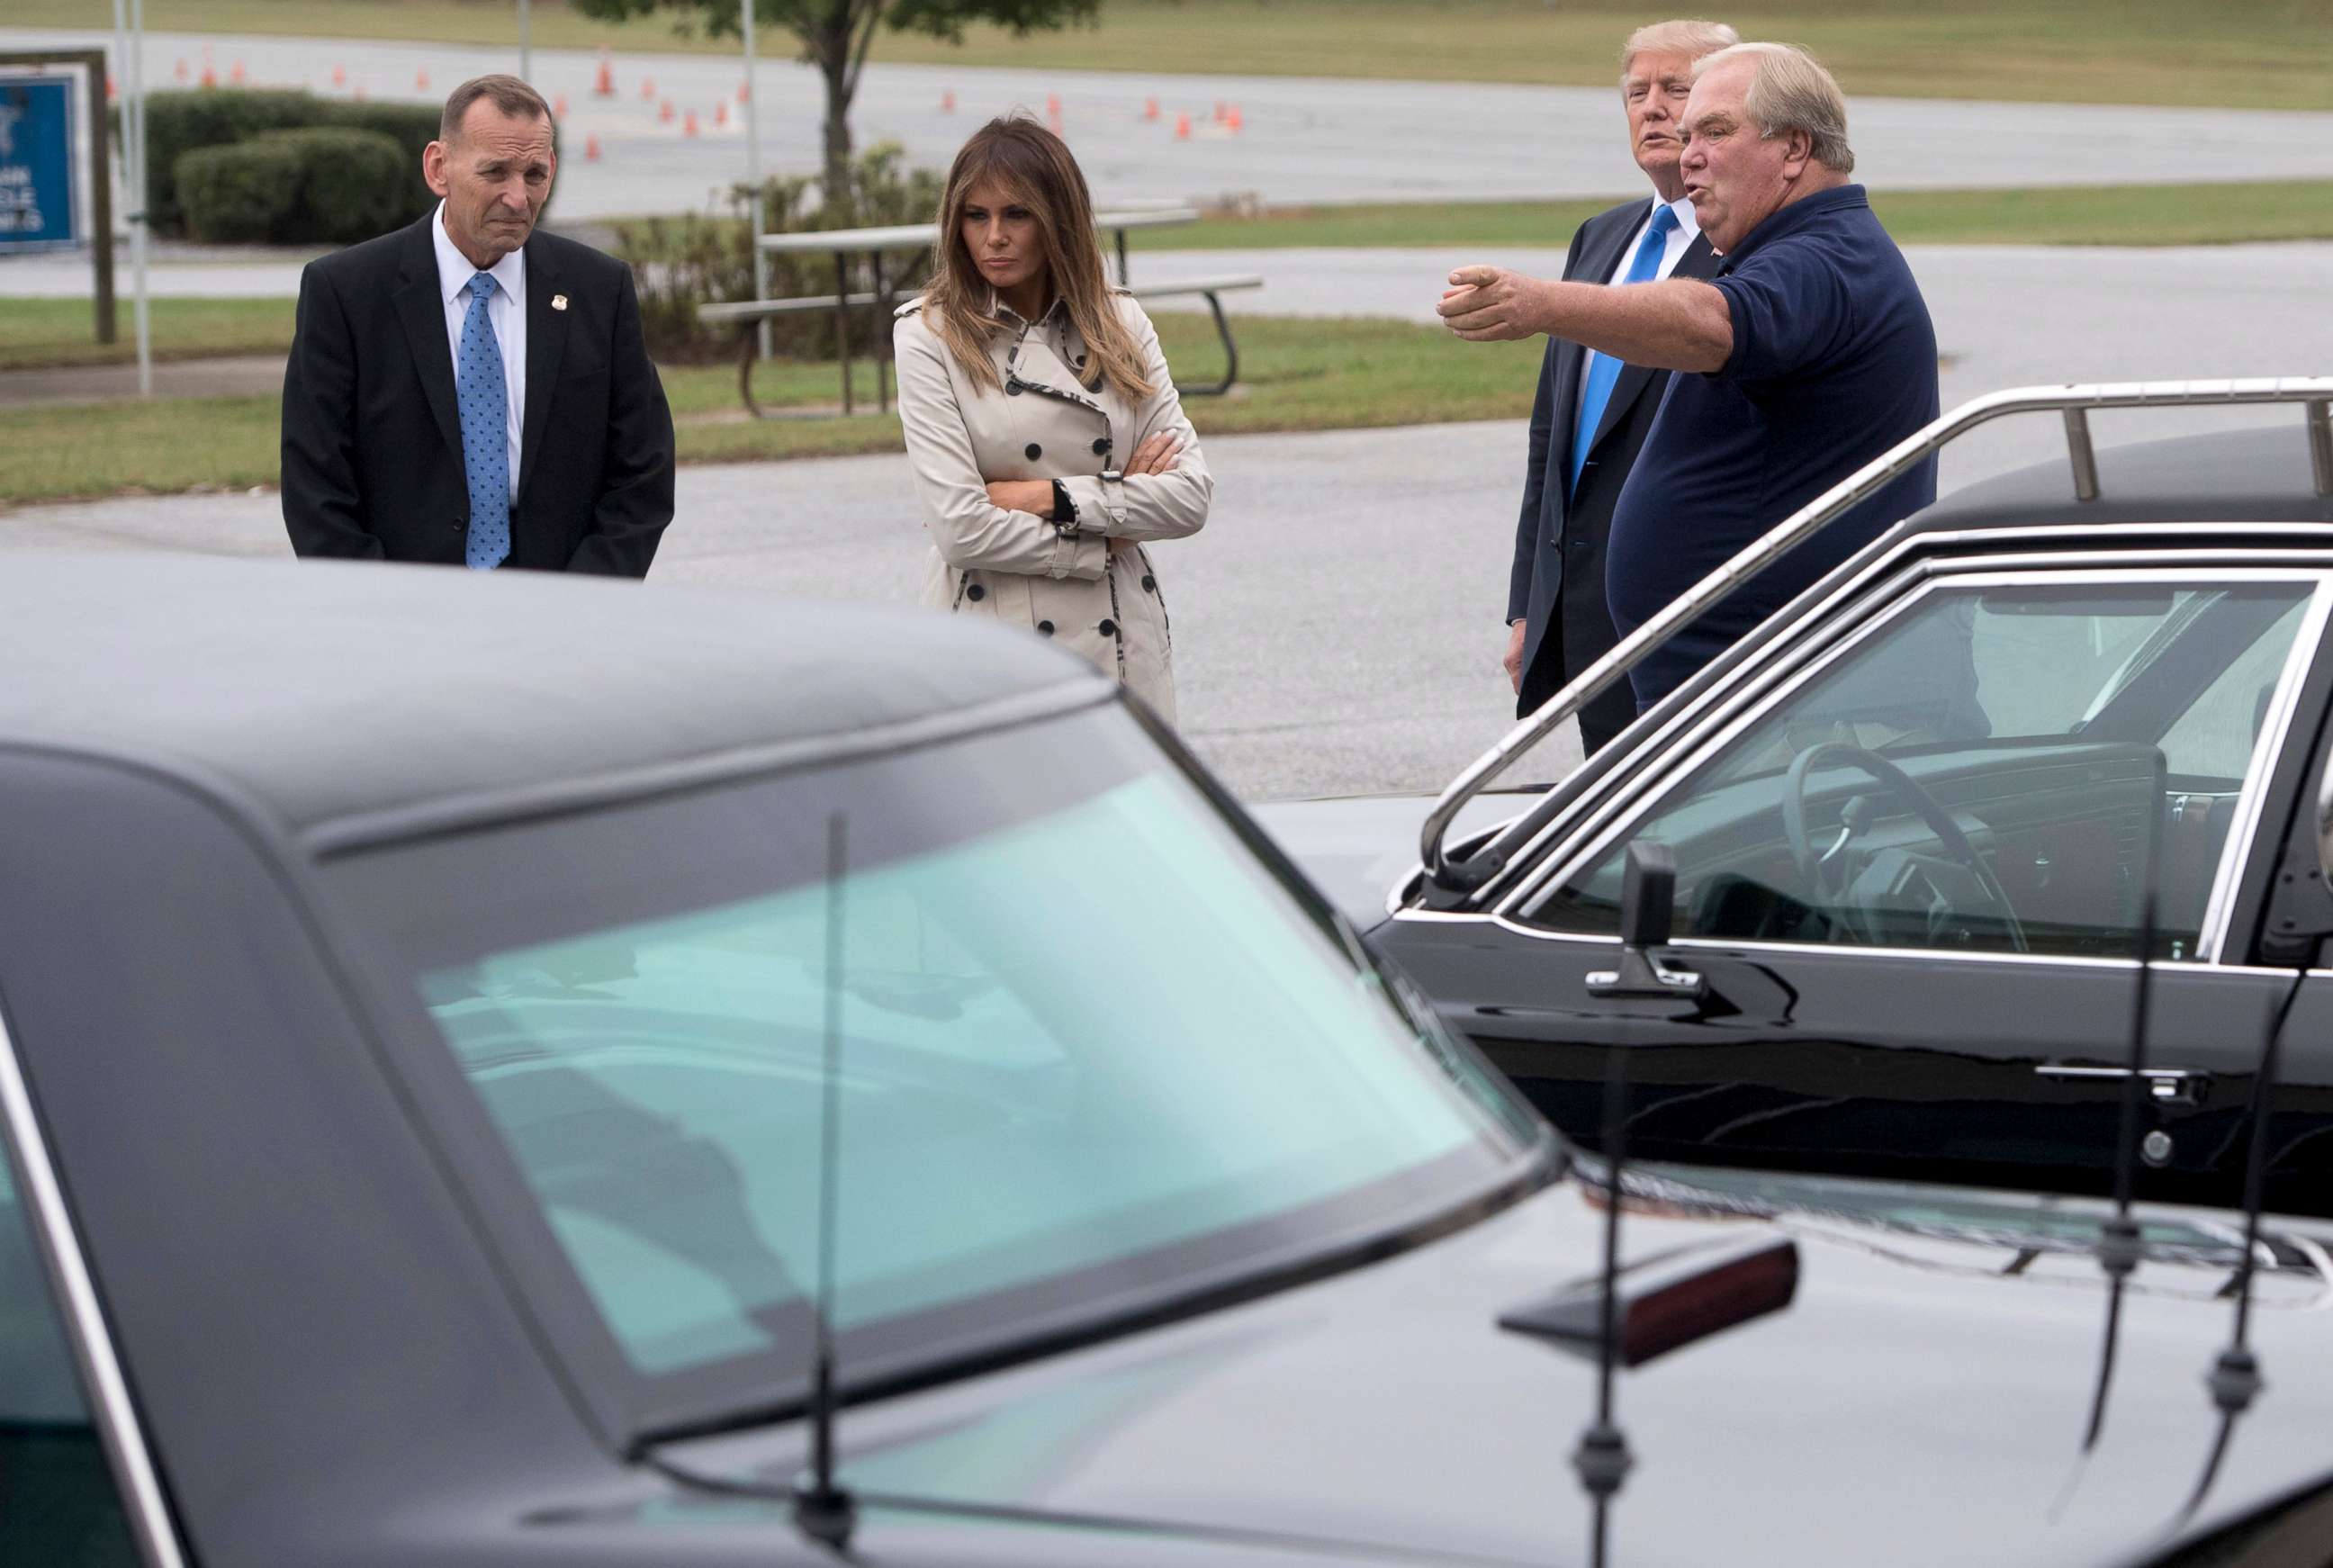 From left,  Secret Service Director Randolph Alles, first lady Melania Trump, President Donald Trump and an unnamed person, look at vehicles at the United States Secret Service James J. Rowley training facility in Beltsville, Md., Oct. 13, 2017.